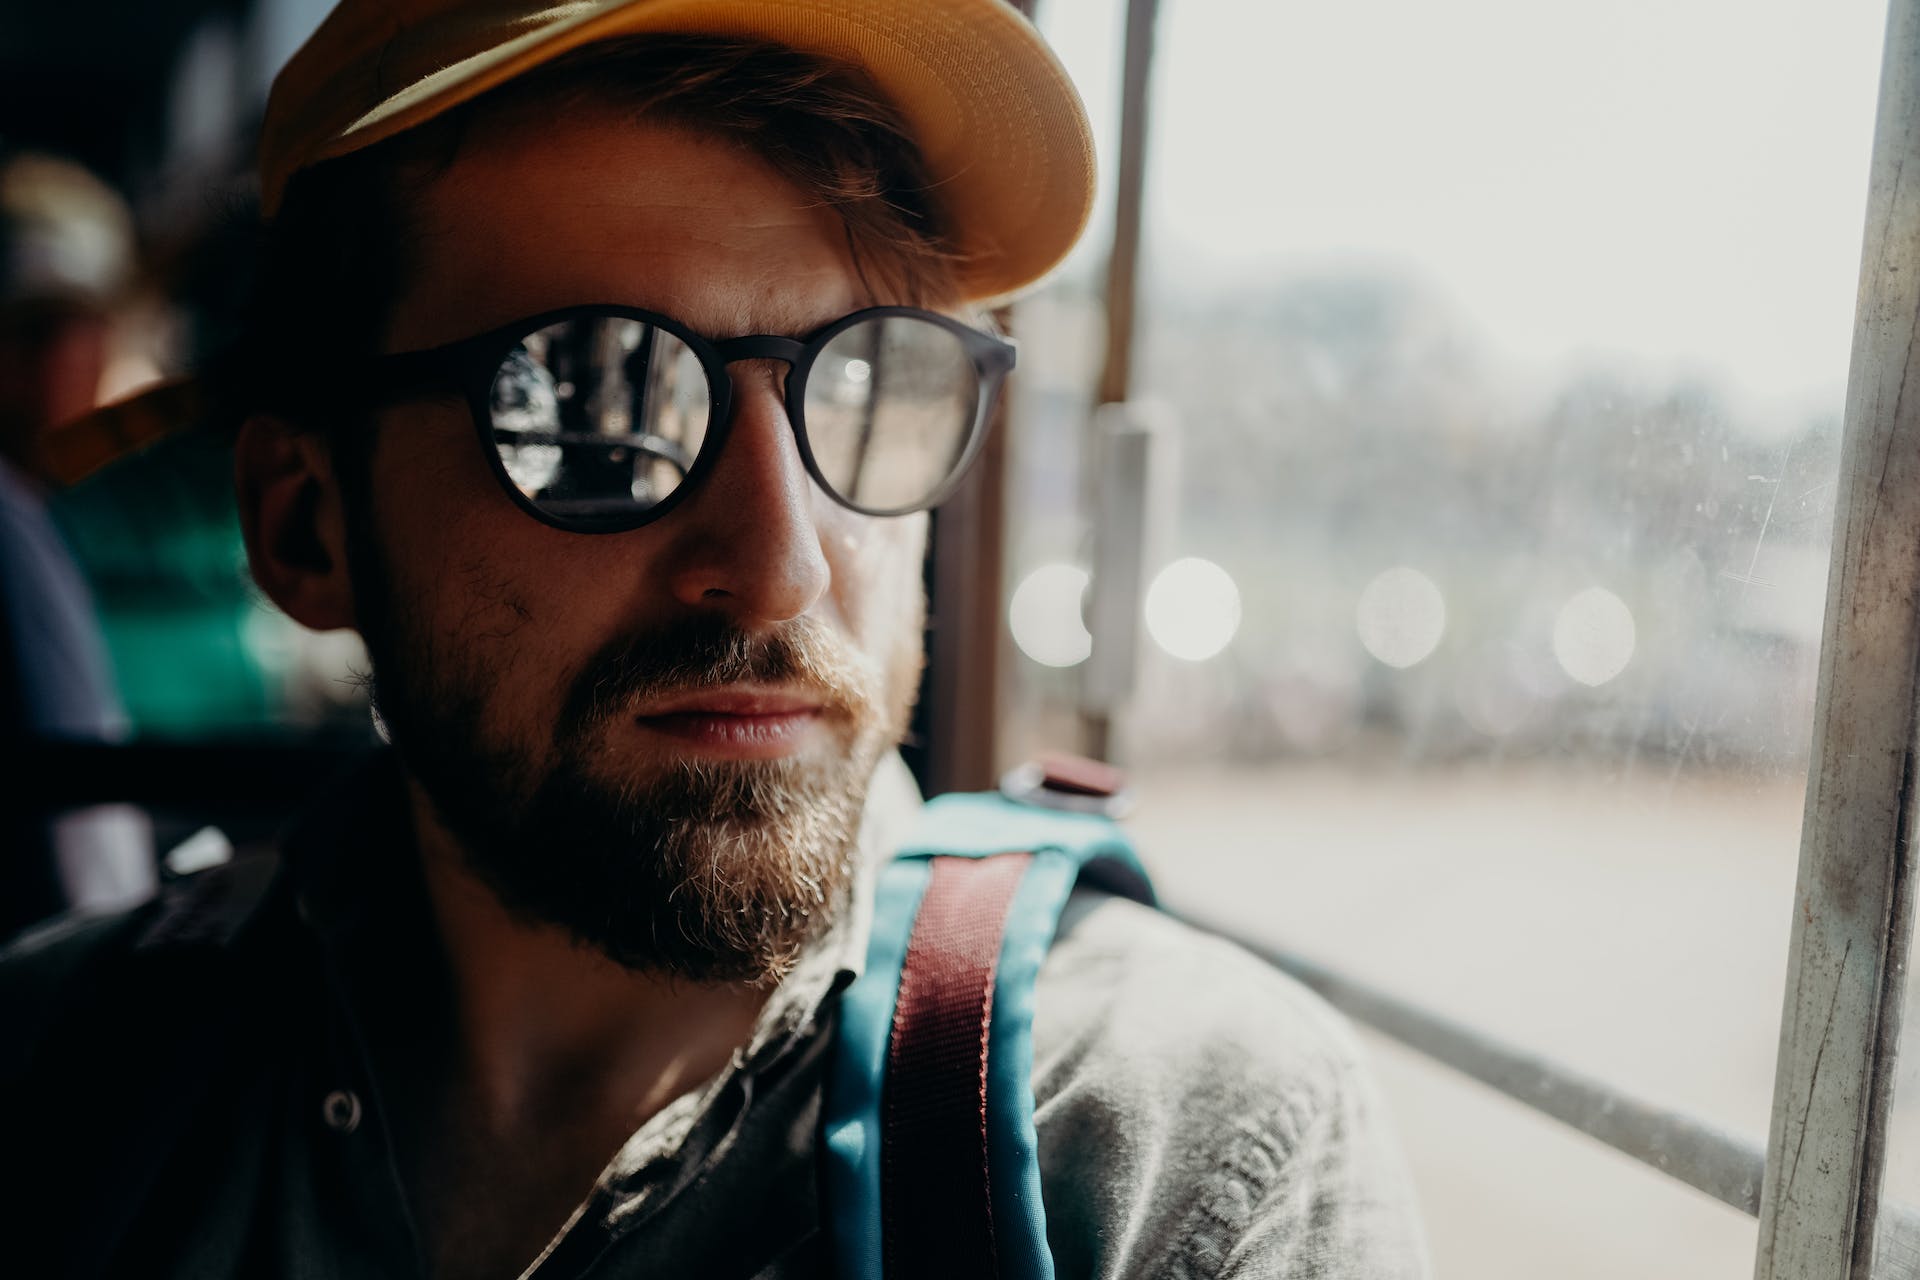 A man on a bus | Source: Pexels